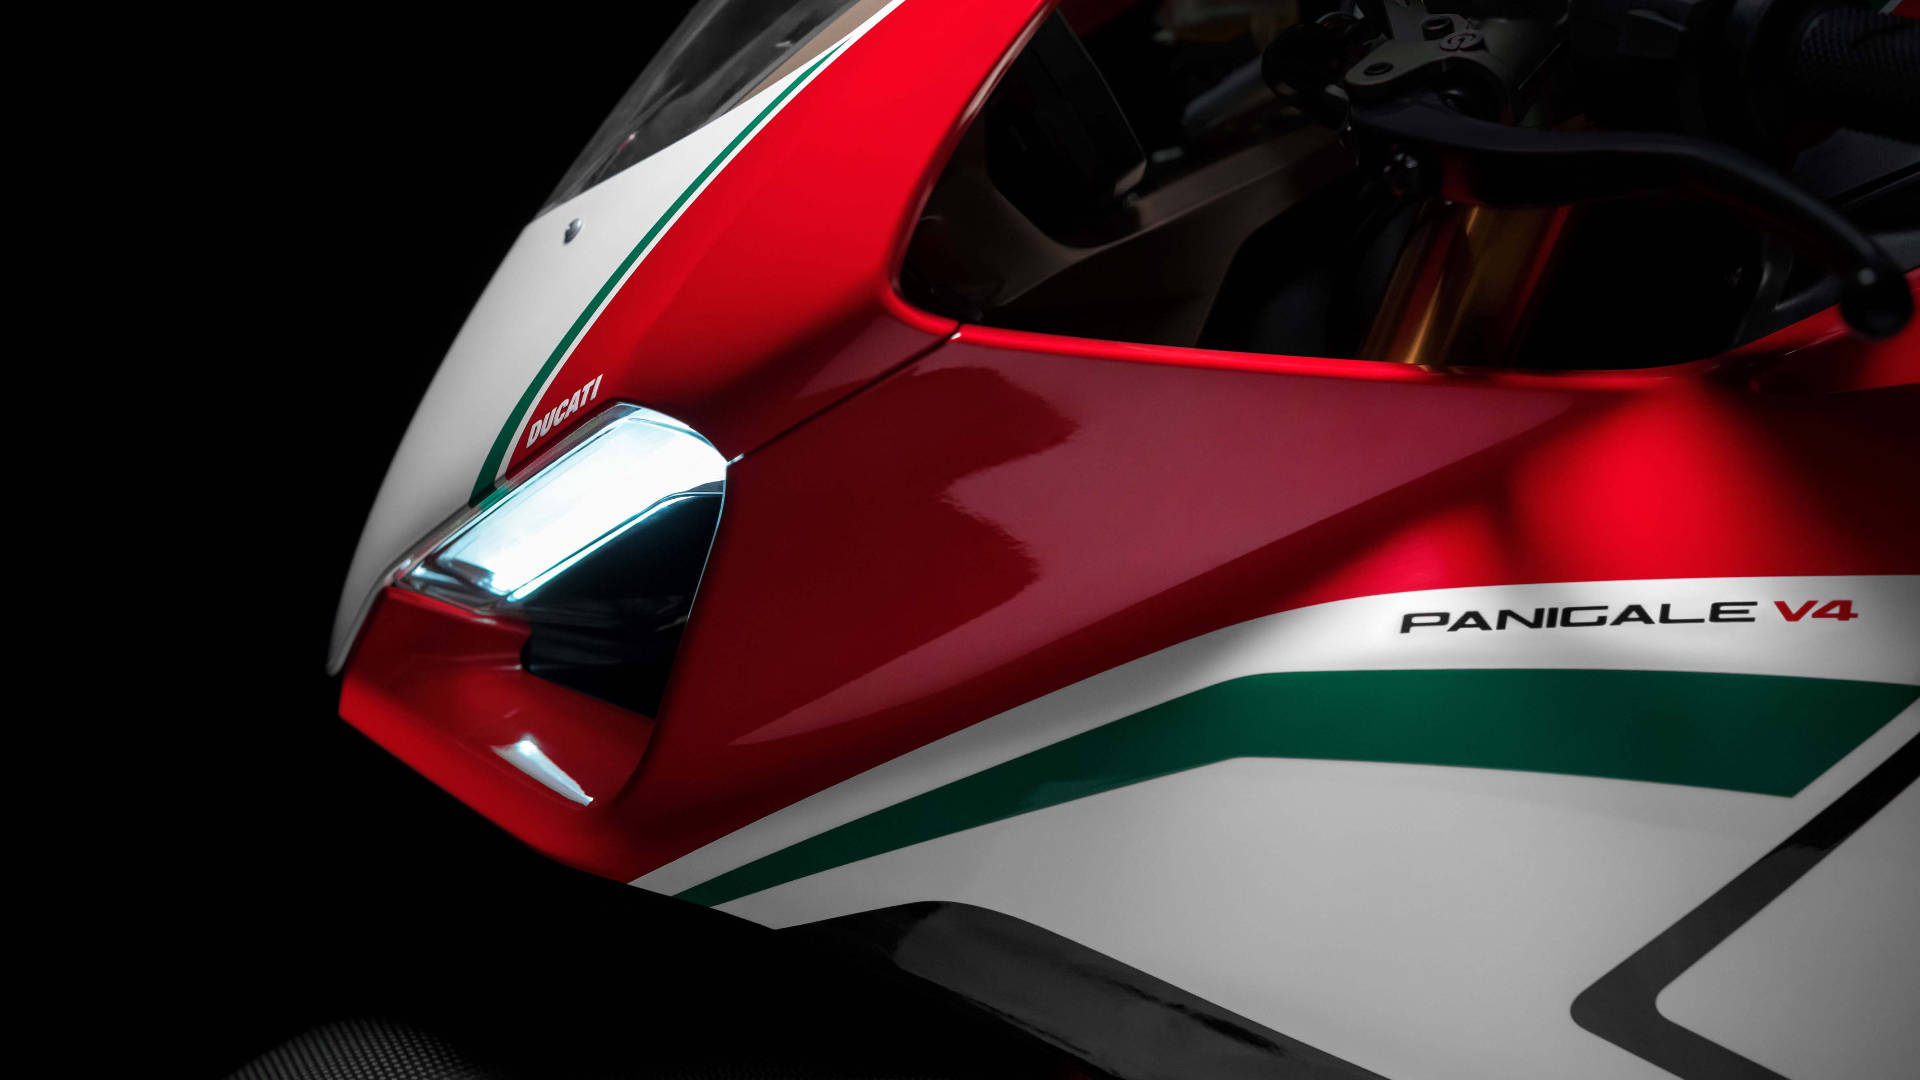 The Legendary Ducati Panigale V4 Speciale